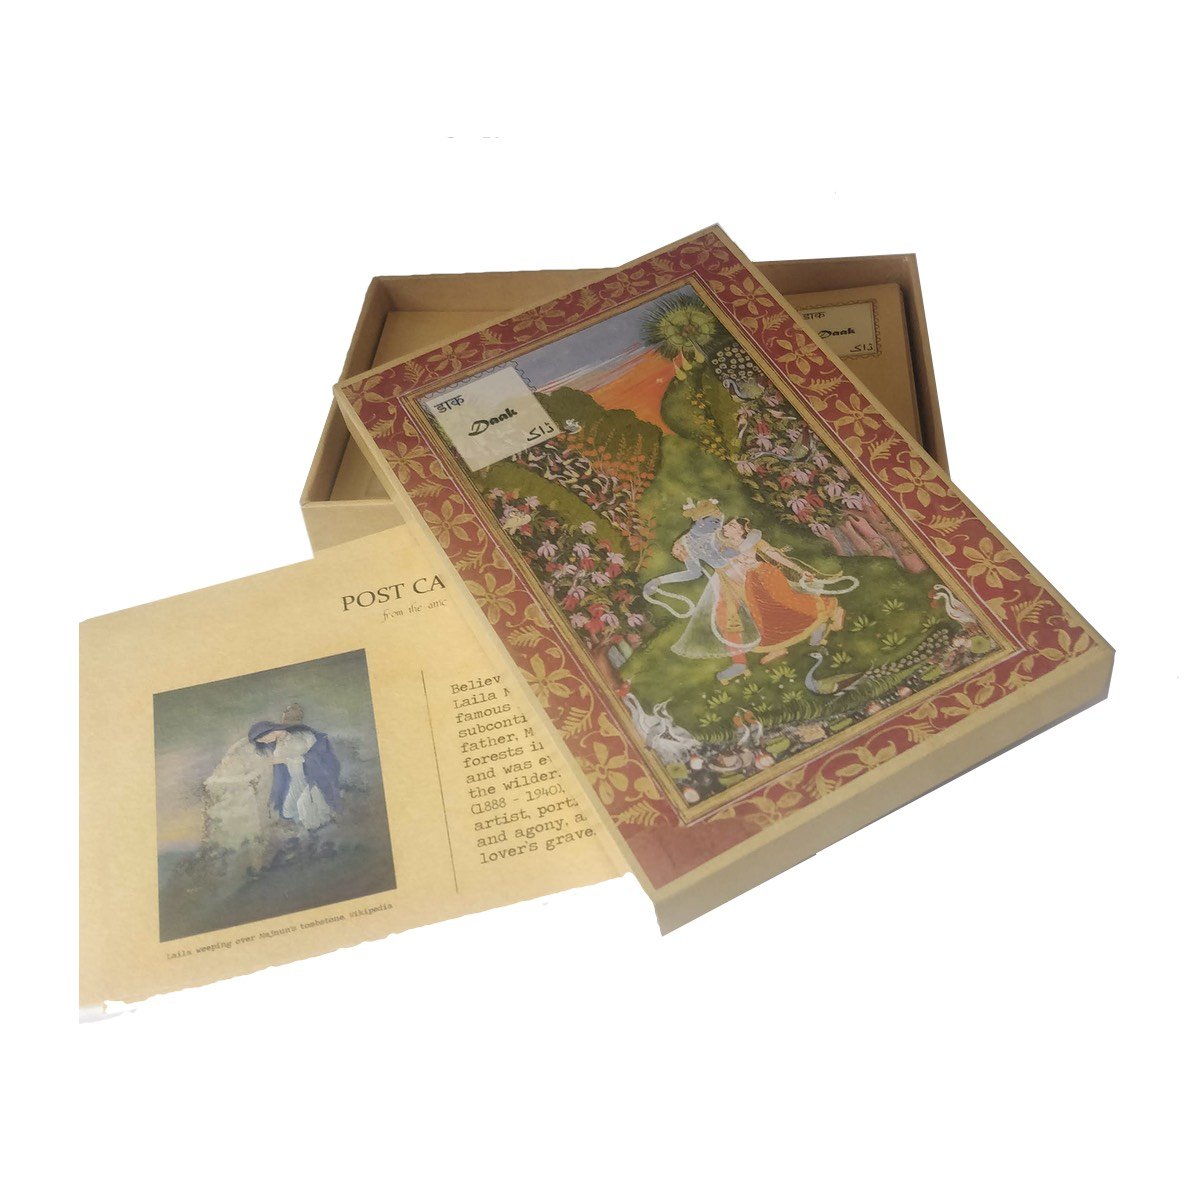 Daak Postcard Box - Postcards Of Love From The Subcontinent